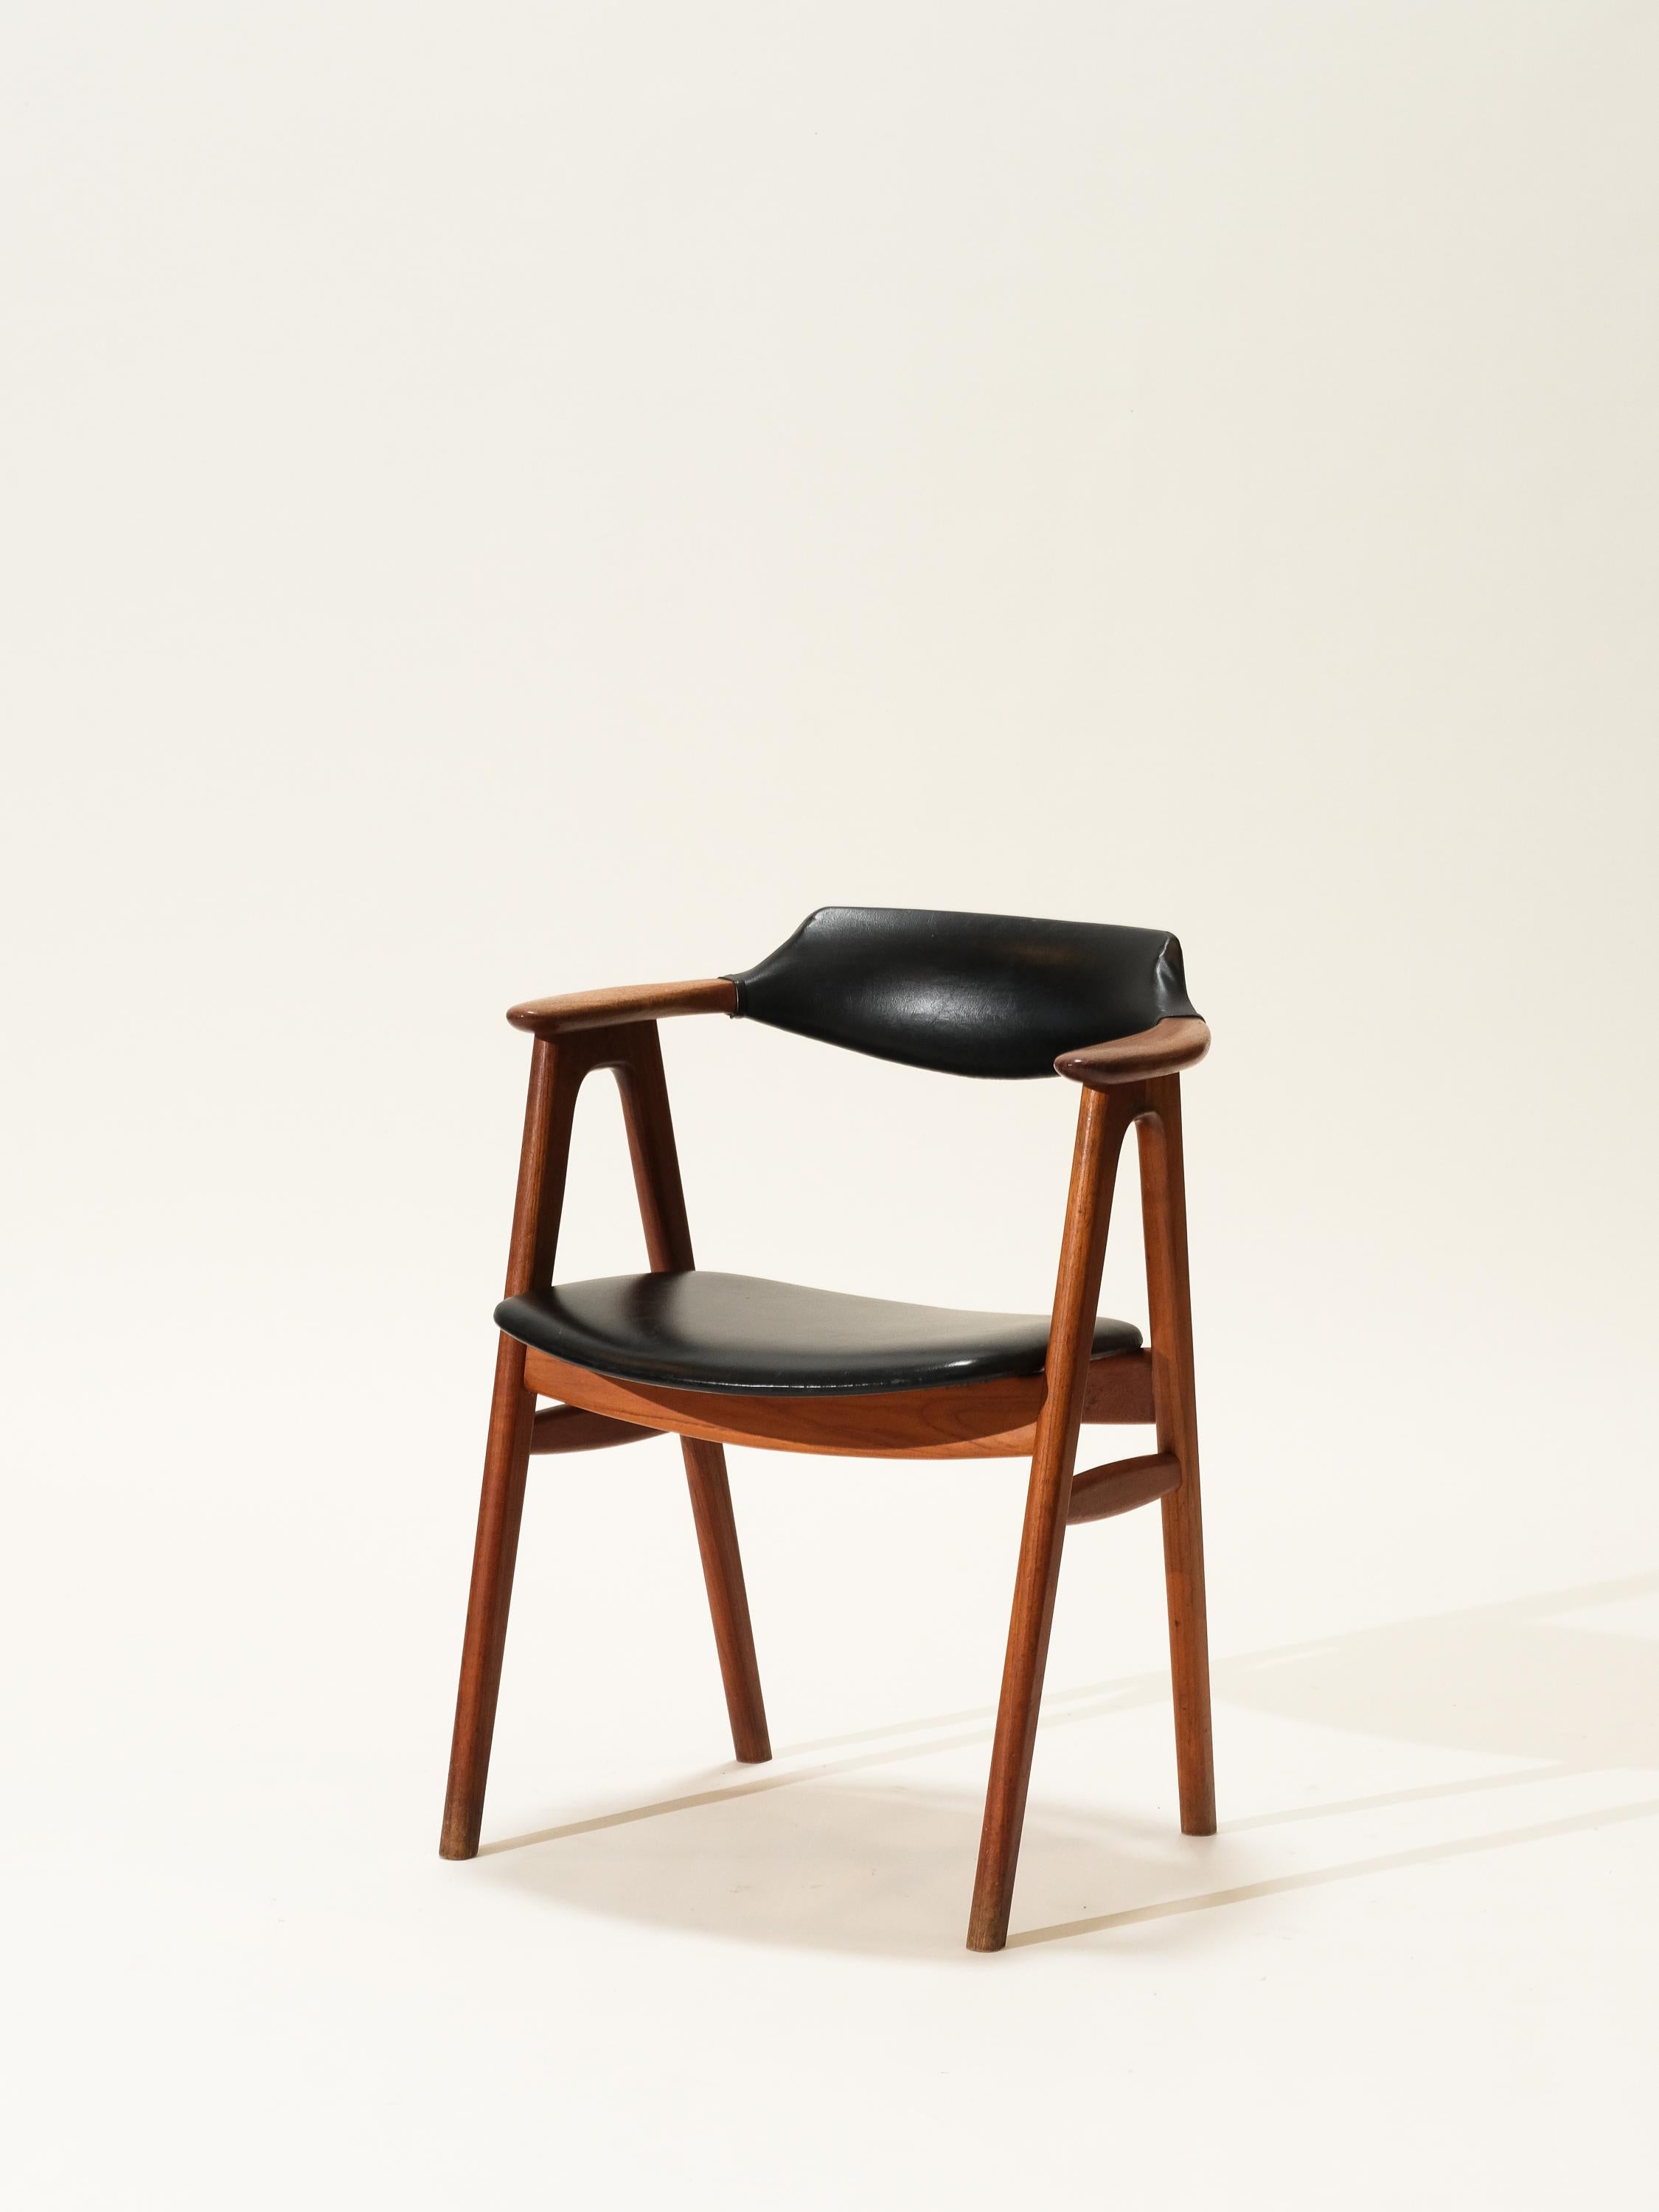 Teak frame with faux leather upholstered seat and back rest. Designed by Erik Kirkegaard for Høng Stolefabrik in the 1960s.
Original condition.